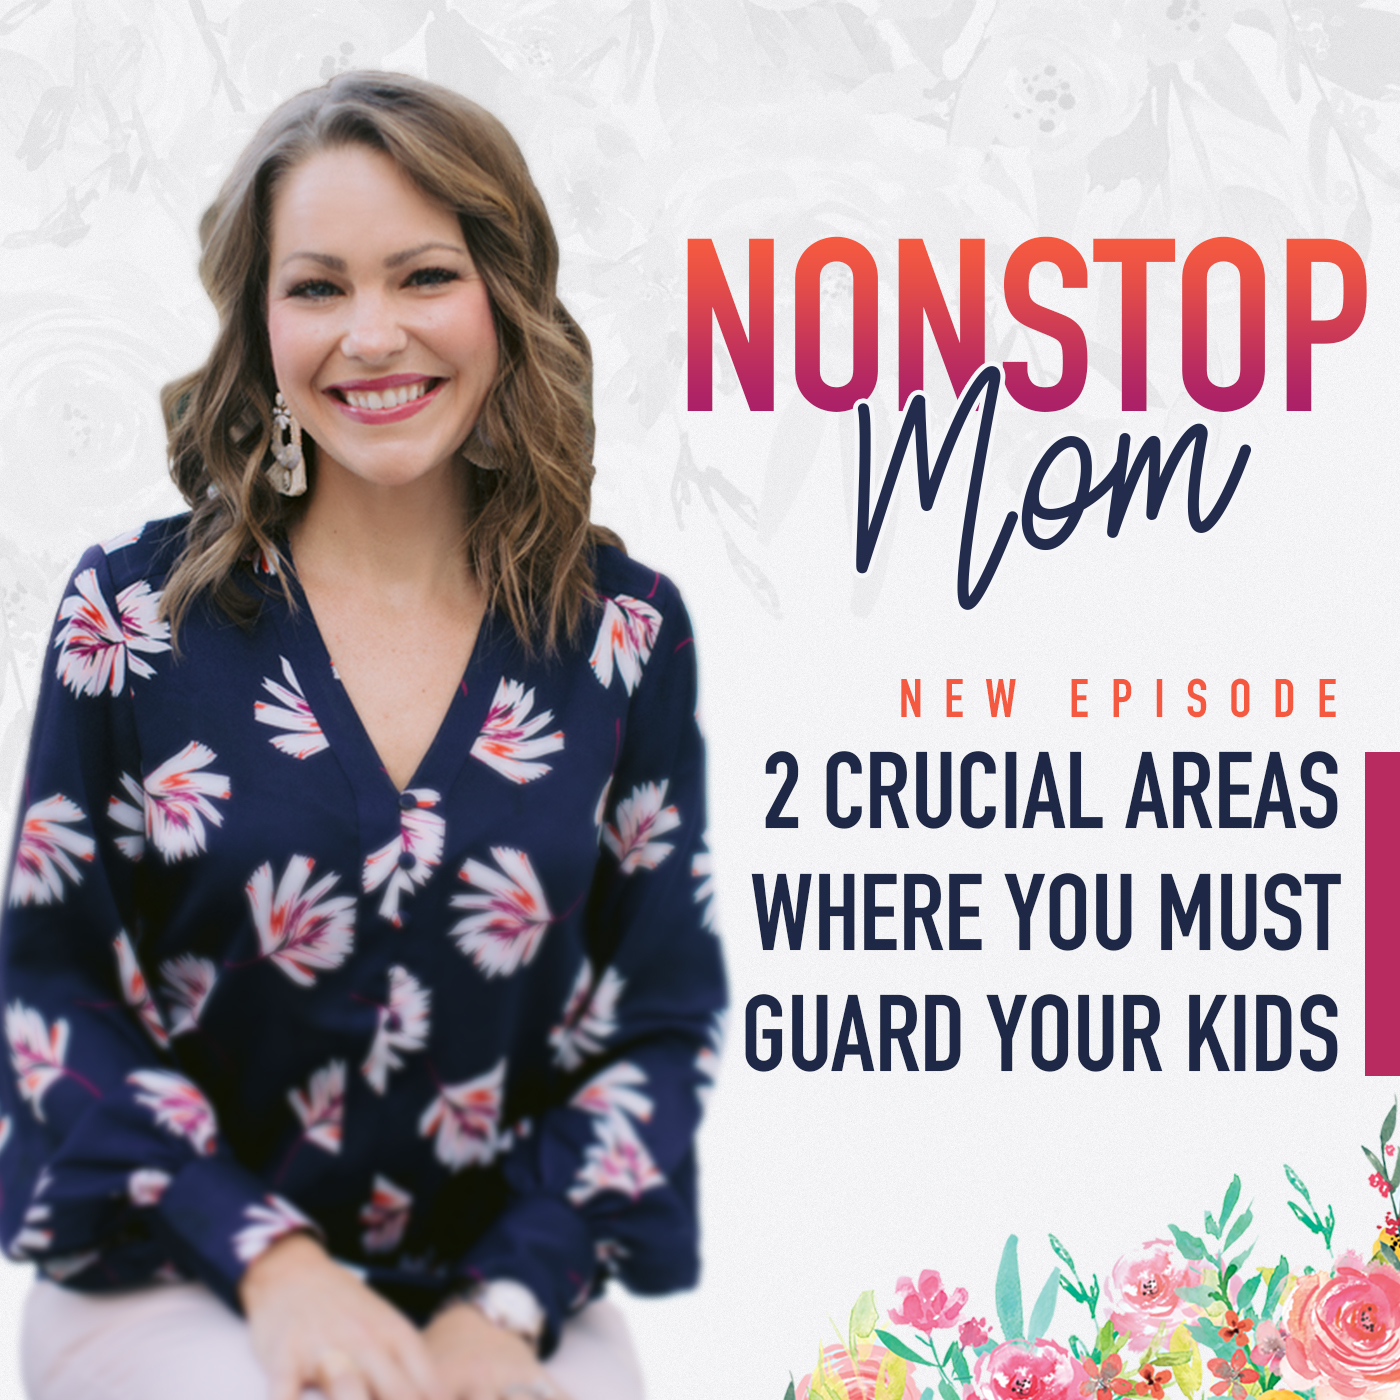 2 Crucial Areas Where You Must Guard Your Kids on the Nonstop Mom Podcast with Carolyn Shuttlesworth